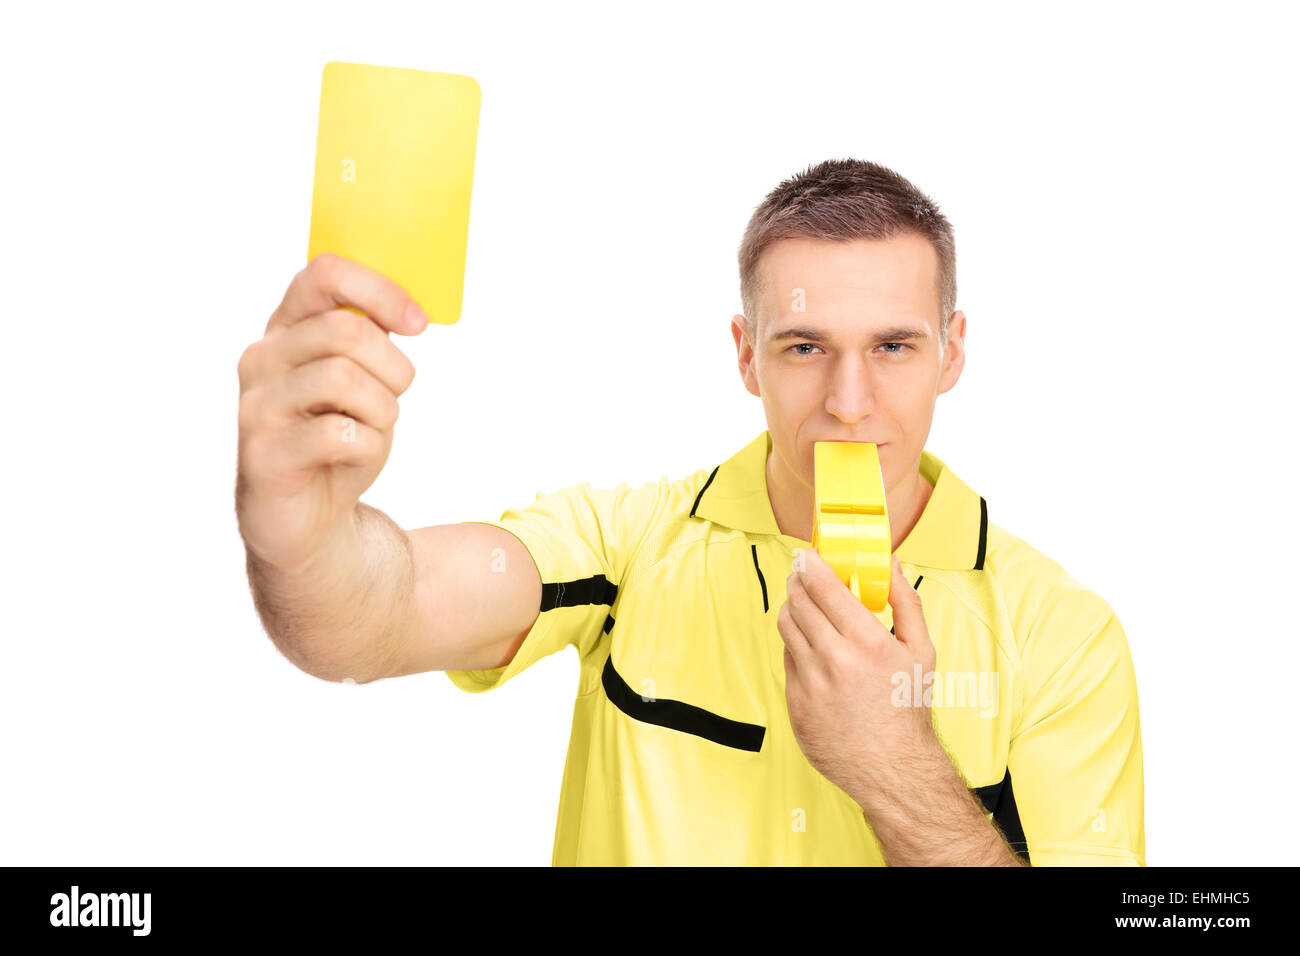 Referee showing yellow card and blowing huge whistle isolated on white background Stock Photo